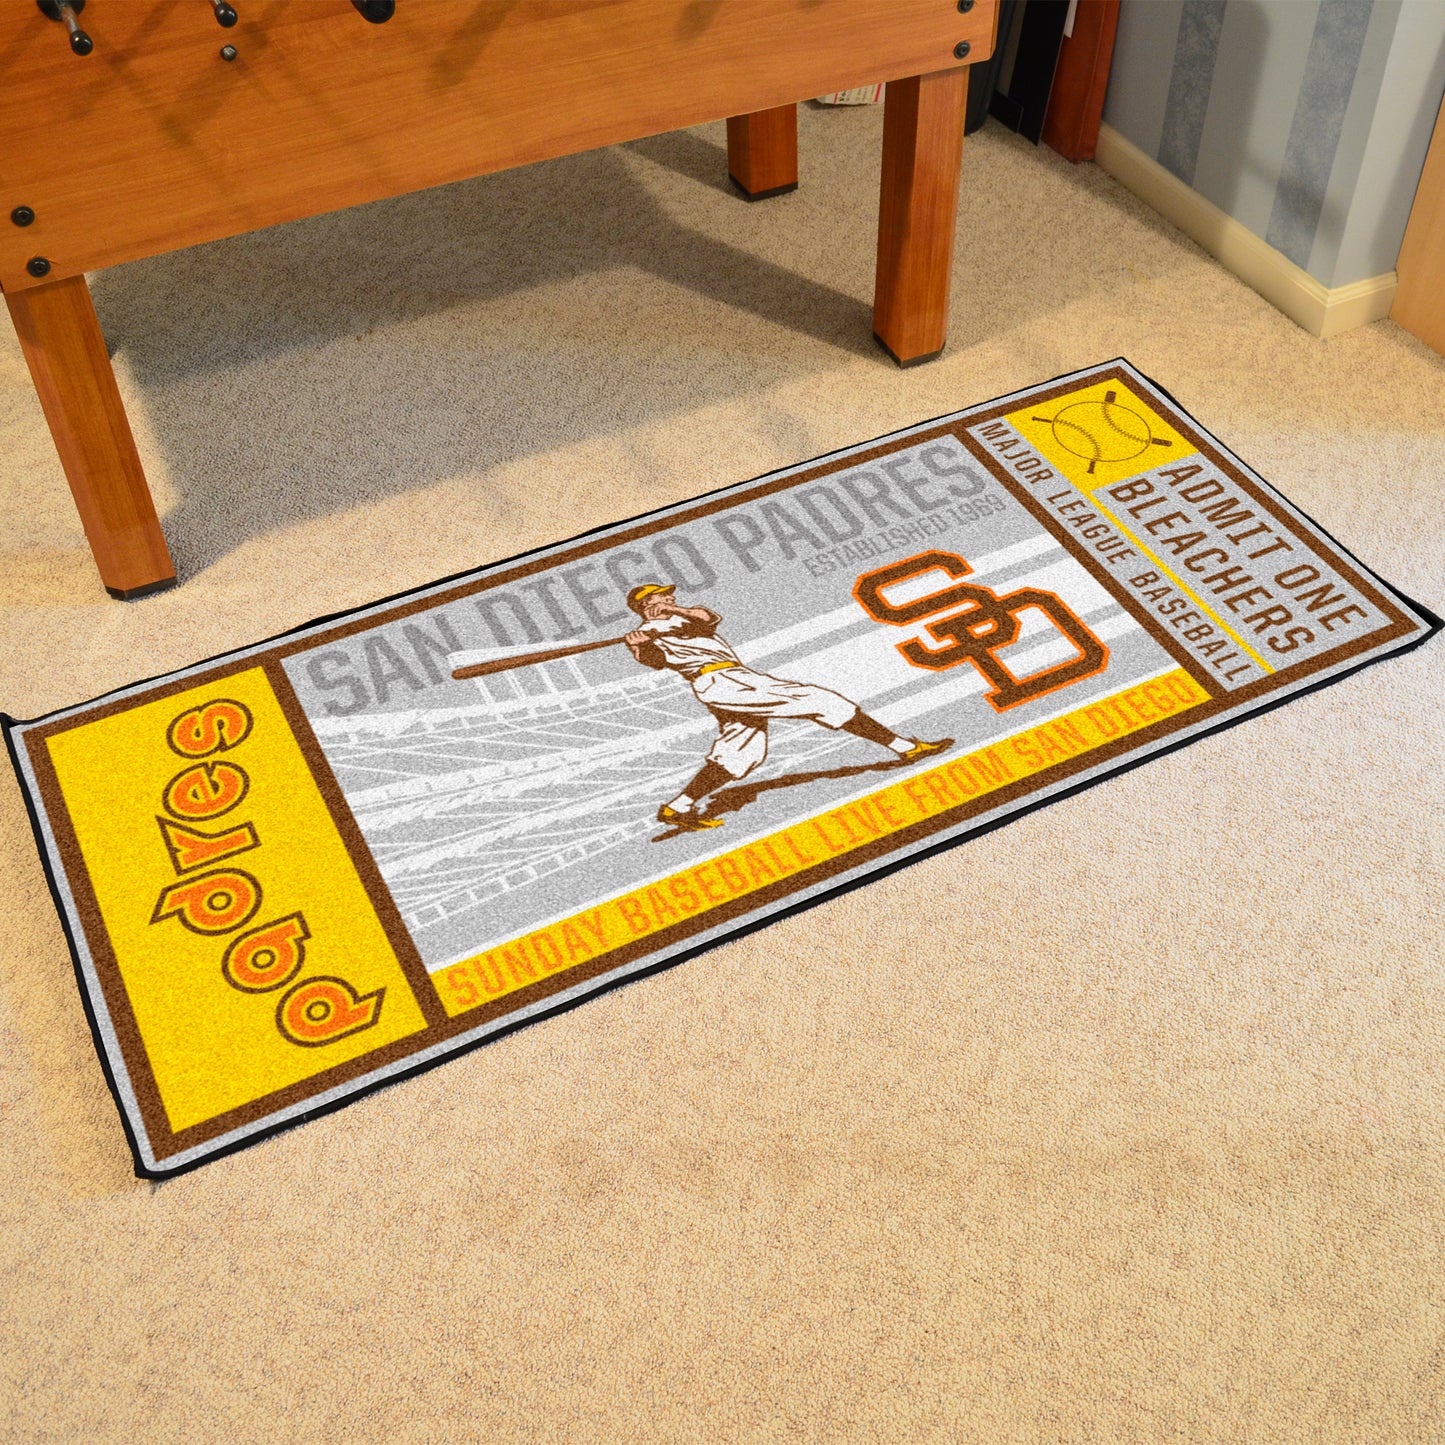 San Diego Padres Ticket Runner Rug - 30in. x 72in. - Retro Collection, 1969 San Diego Padres